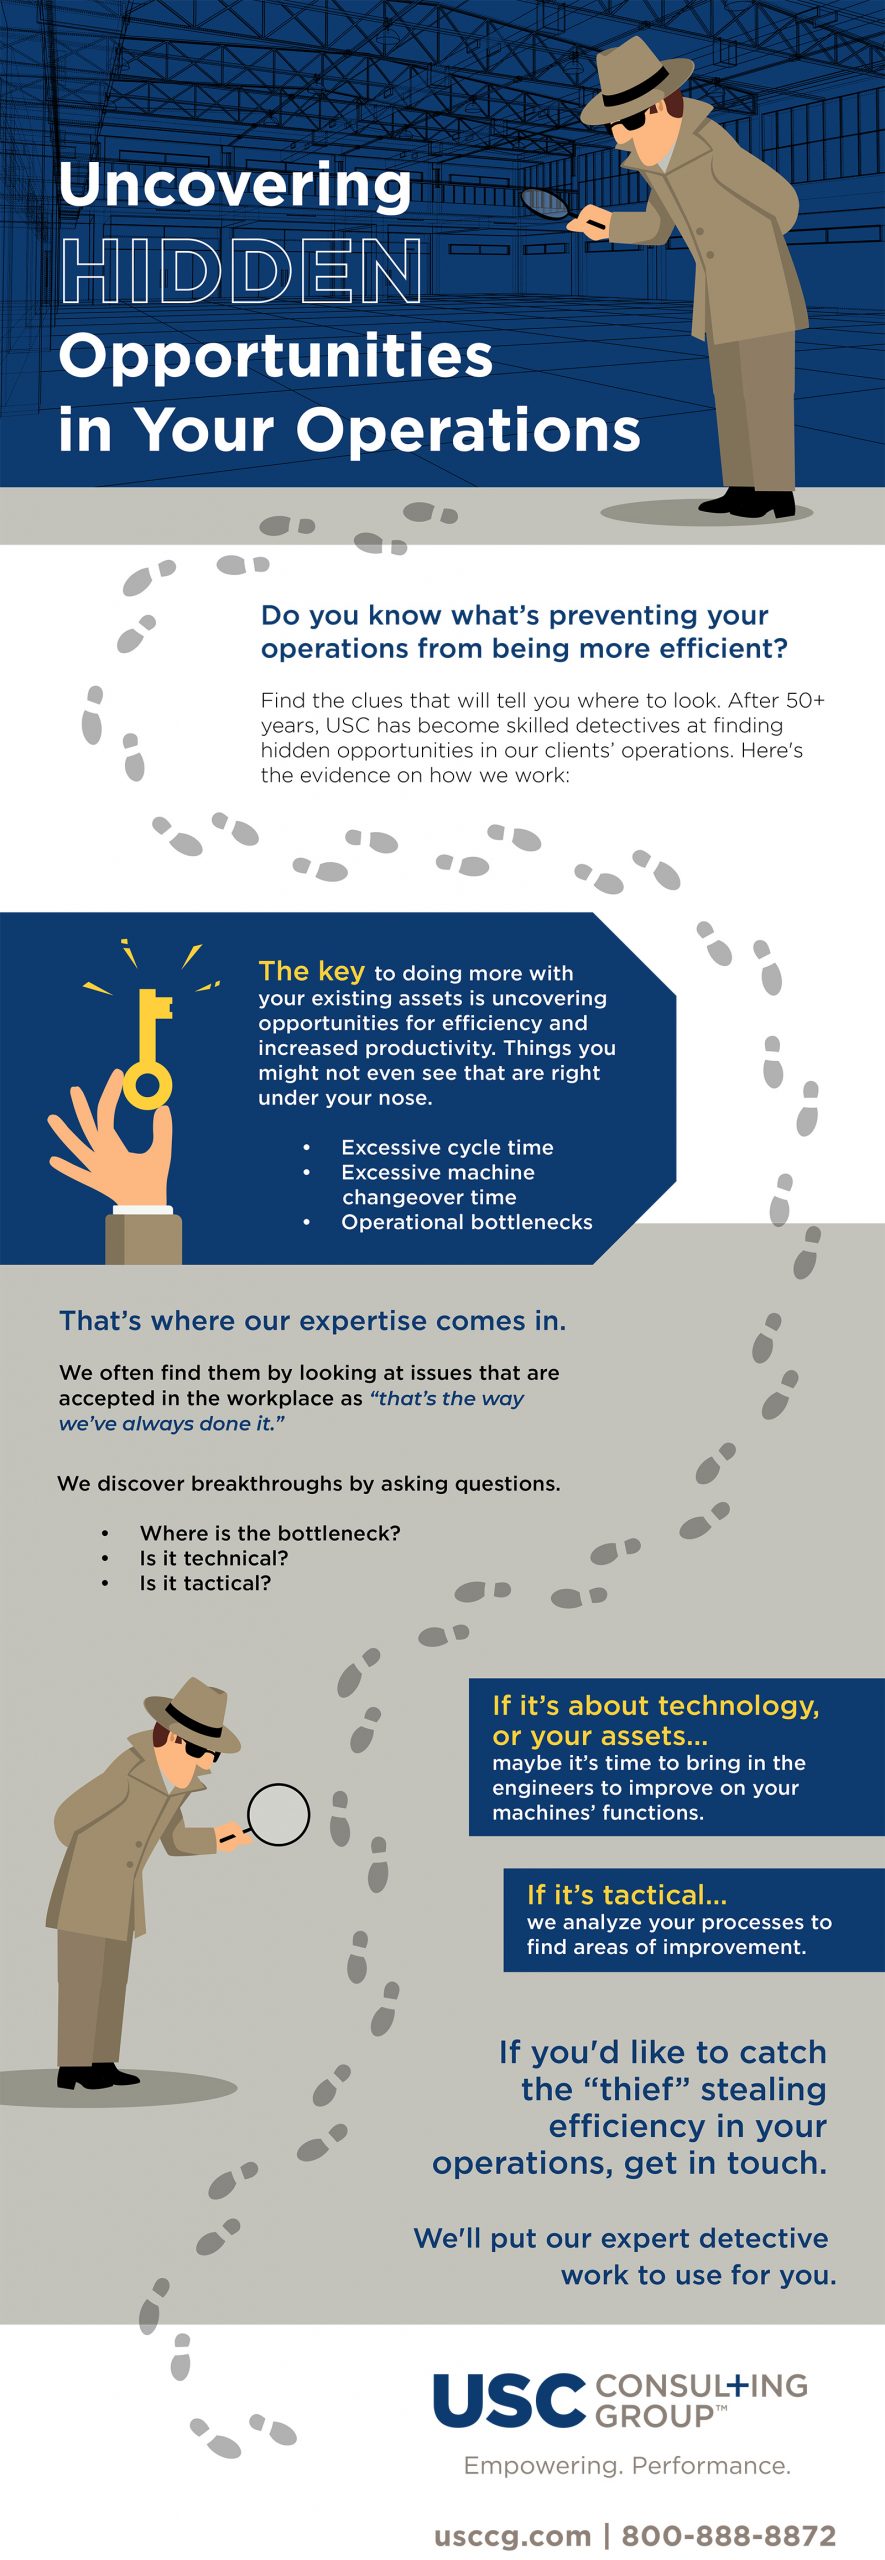 Uncovering Hidden Opportunities infographic